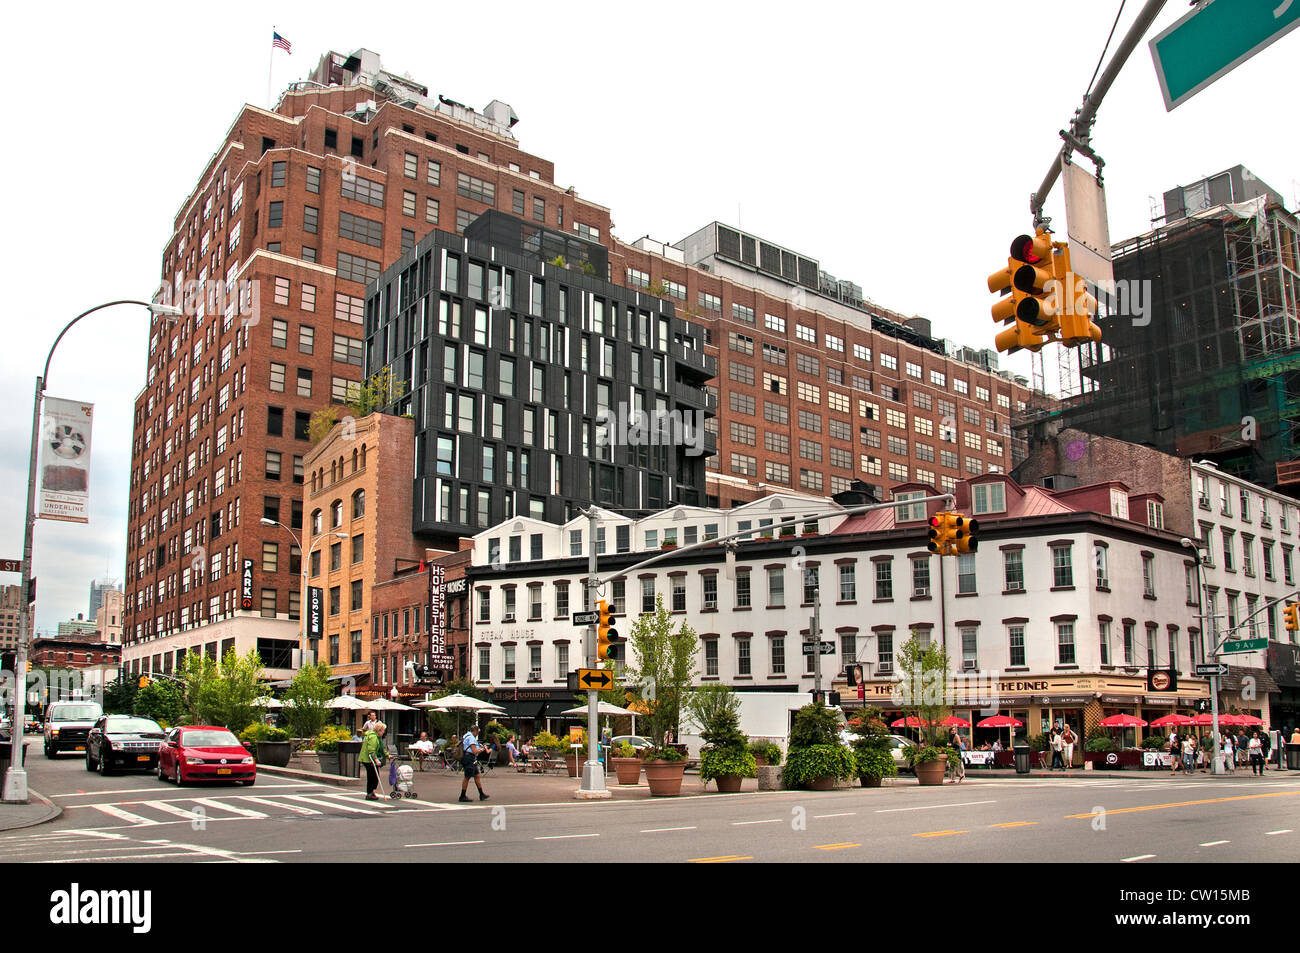 8th Avenue W 14th Street  Meatpacking District  Manhattan New York City United States of America Stock Photo